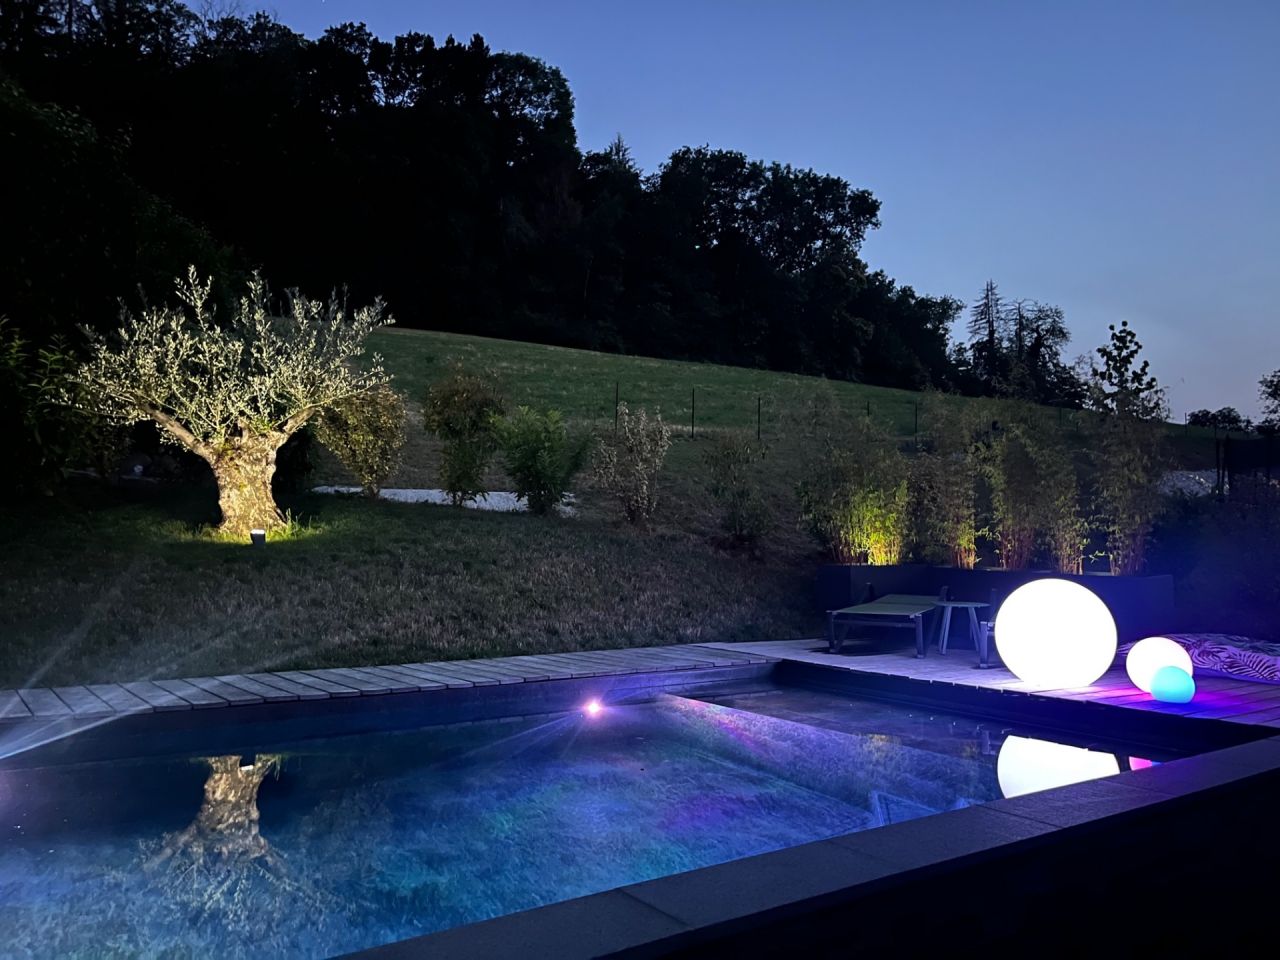 Pool area by night